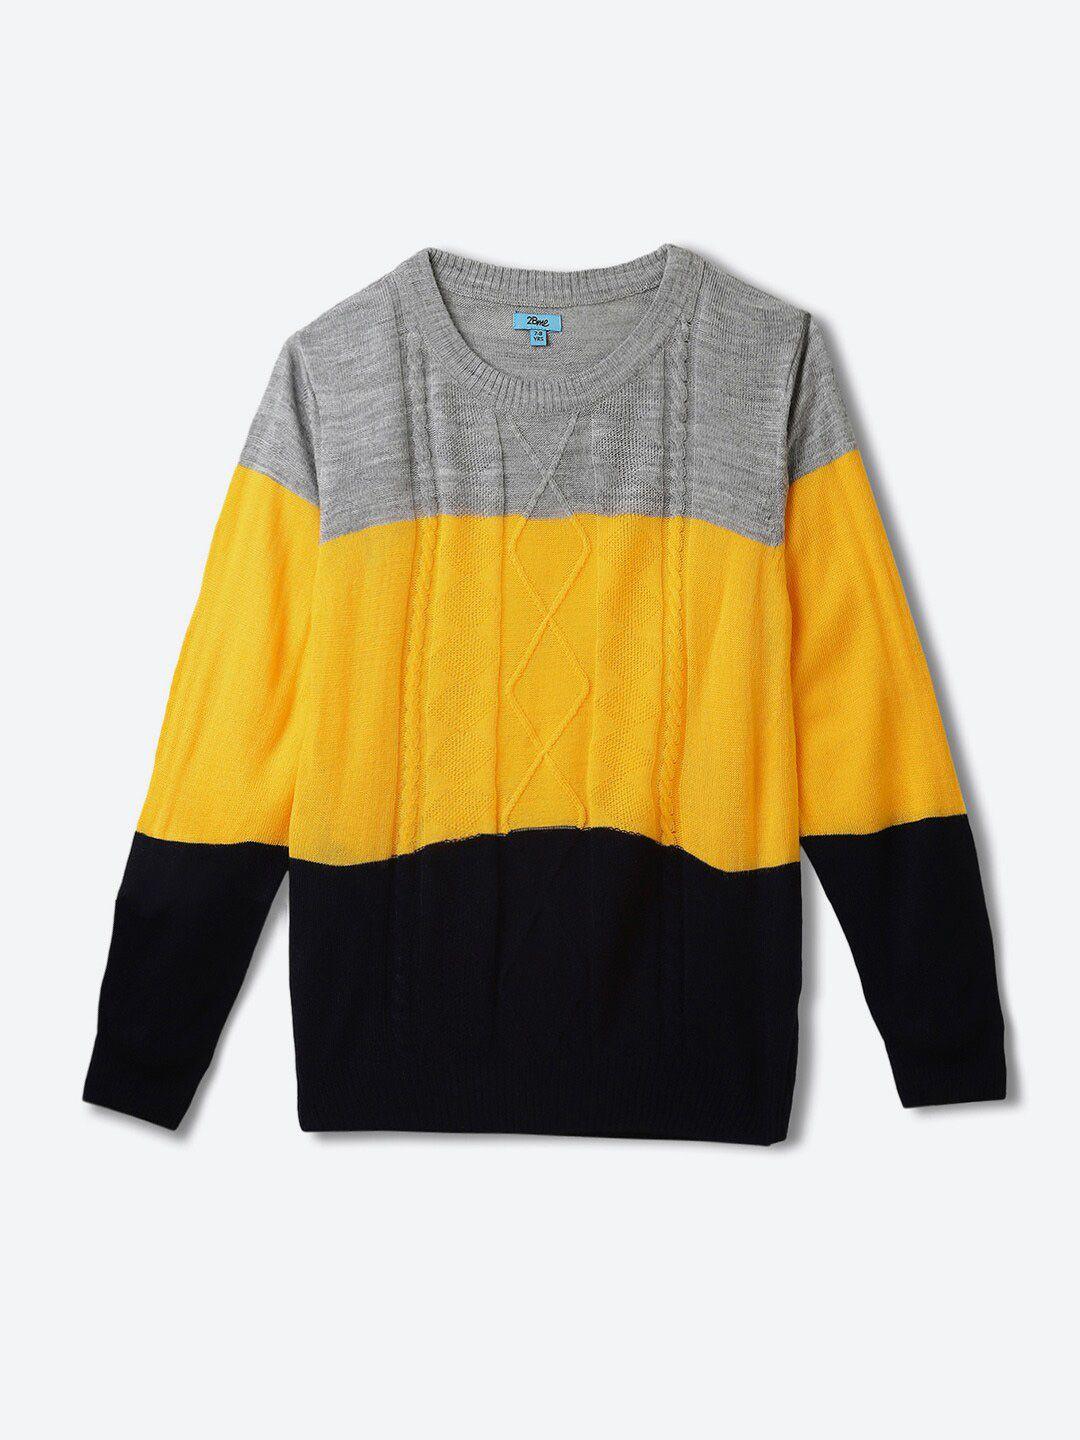 2bme boys colourblocked cable knit round neck long sleeve acrylic pullover sweater